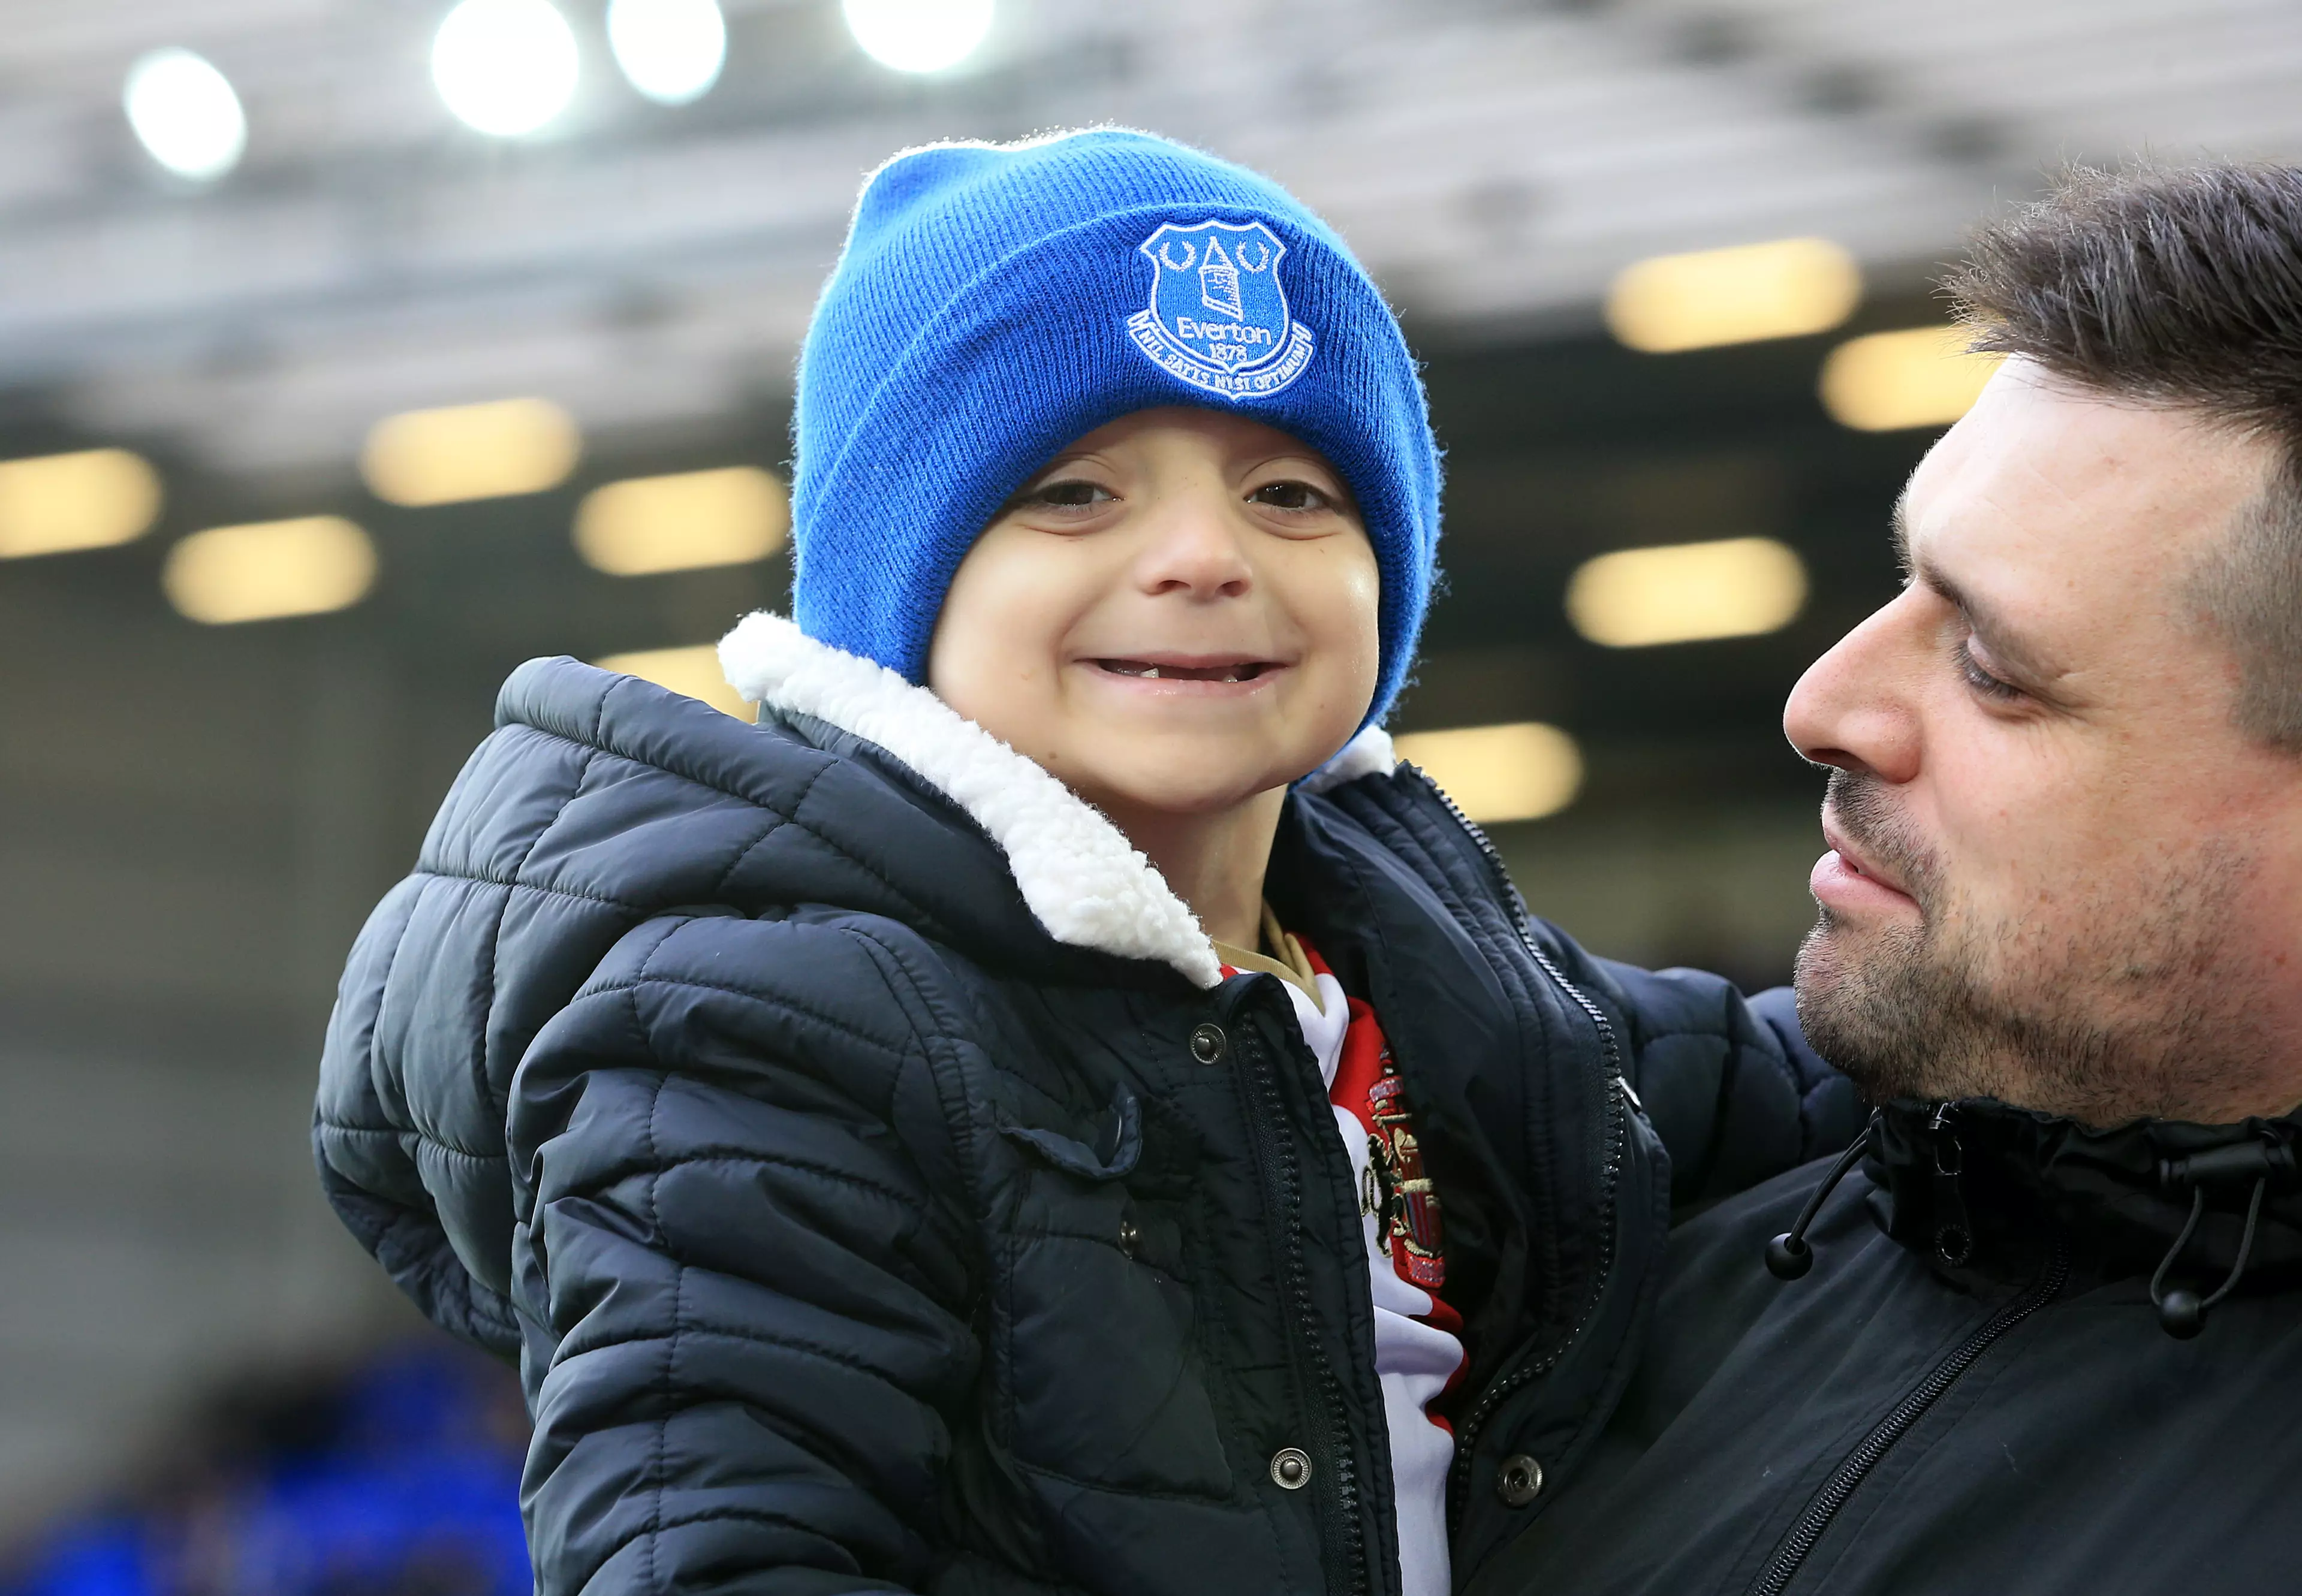 Bradley Lowery continues to inspire others.